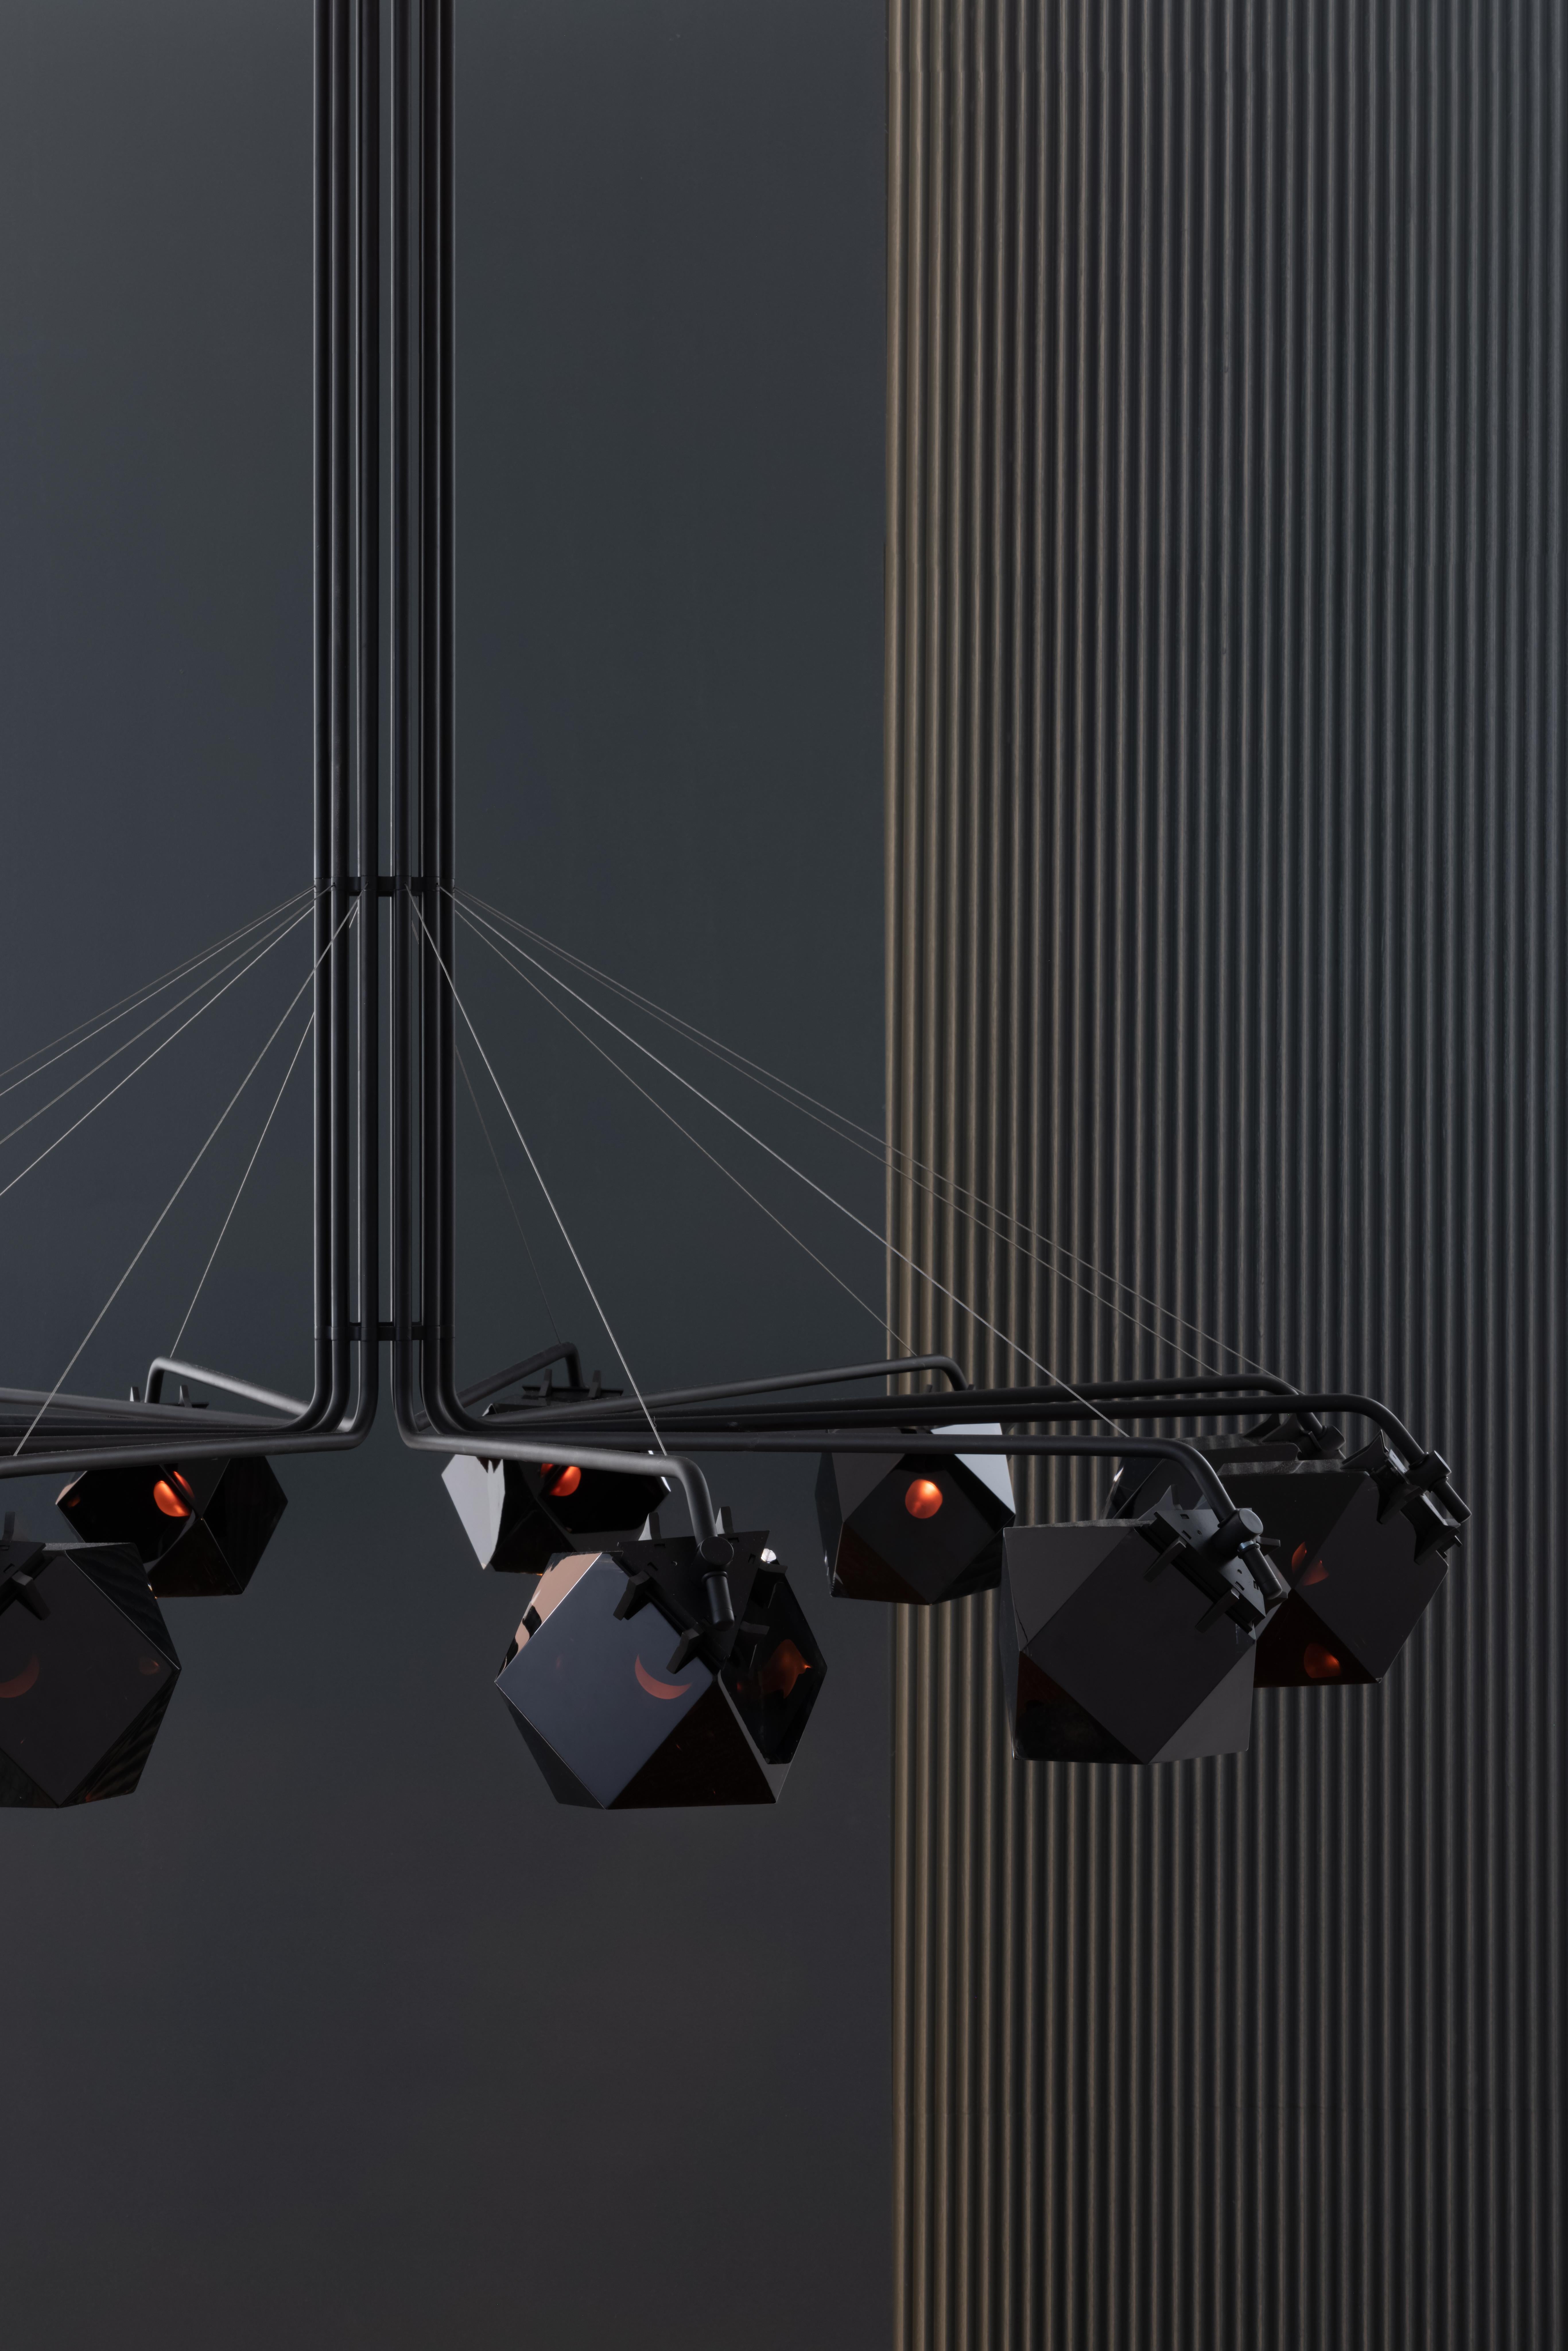 The Welles Central Chandelier 12 brings an impressive sense of scale and structure, making it the perfect statement piece for a large space. Munge’s capsule collection comprises a Central Chandelier in three different sizes, alongside an Arm